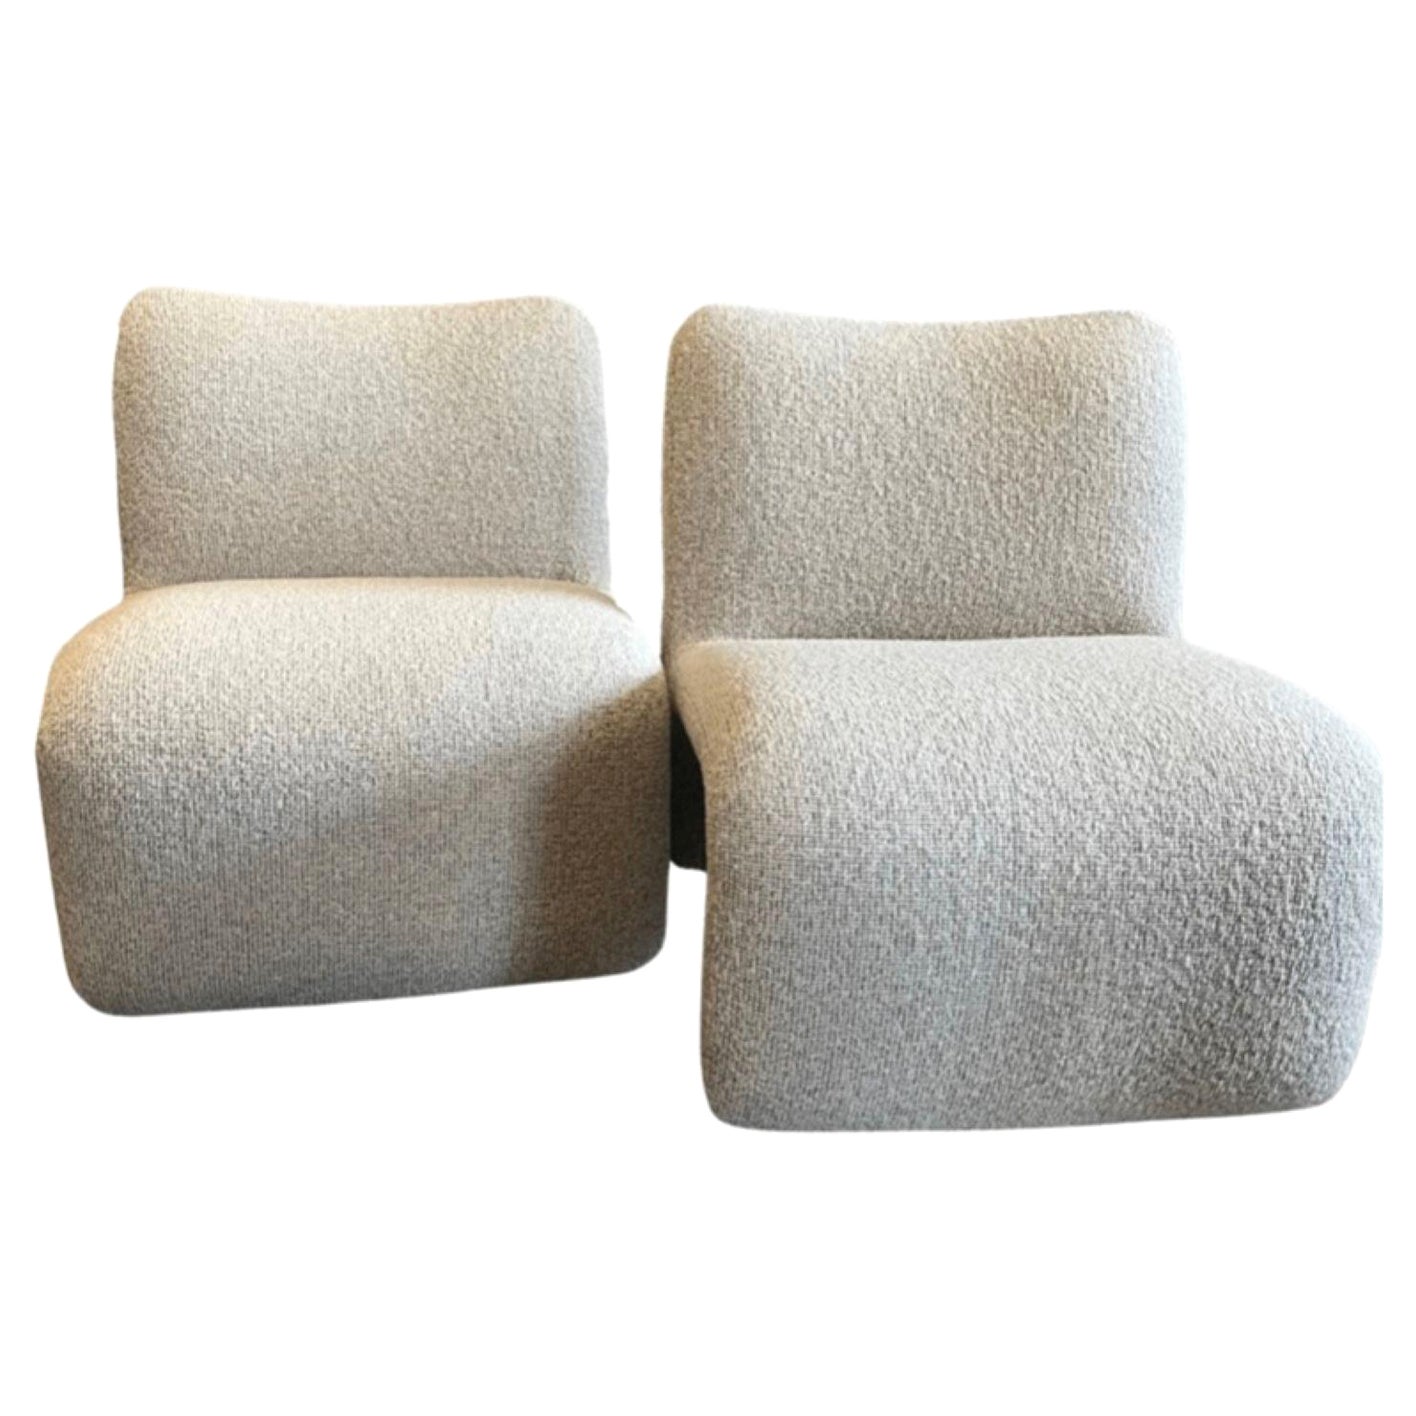 Kagan for Preview Sculptural Lounge Chairs